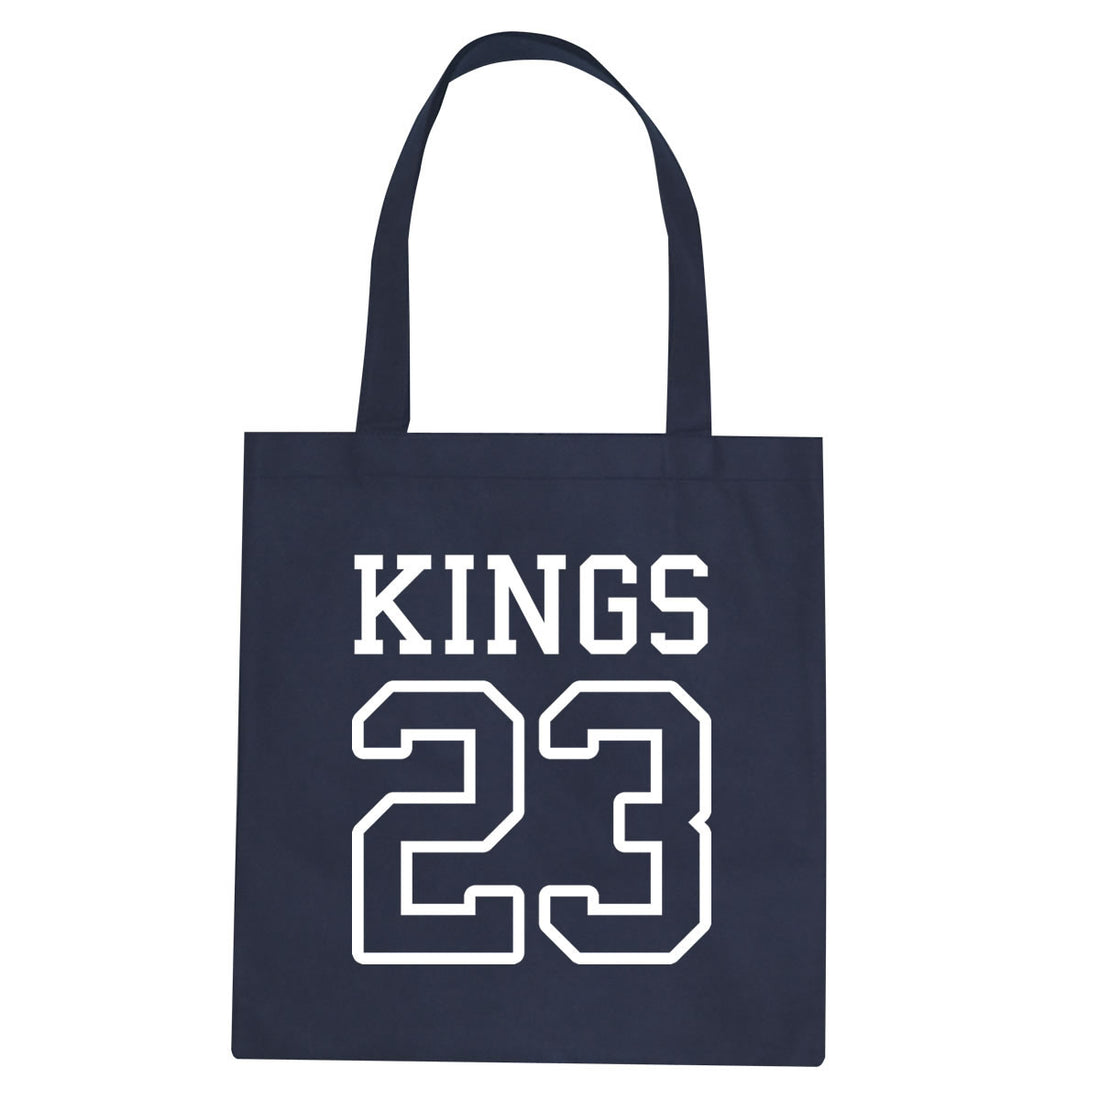 KINGS 23 Jersey Tote Bag By Kings Of NY